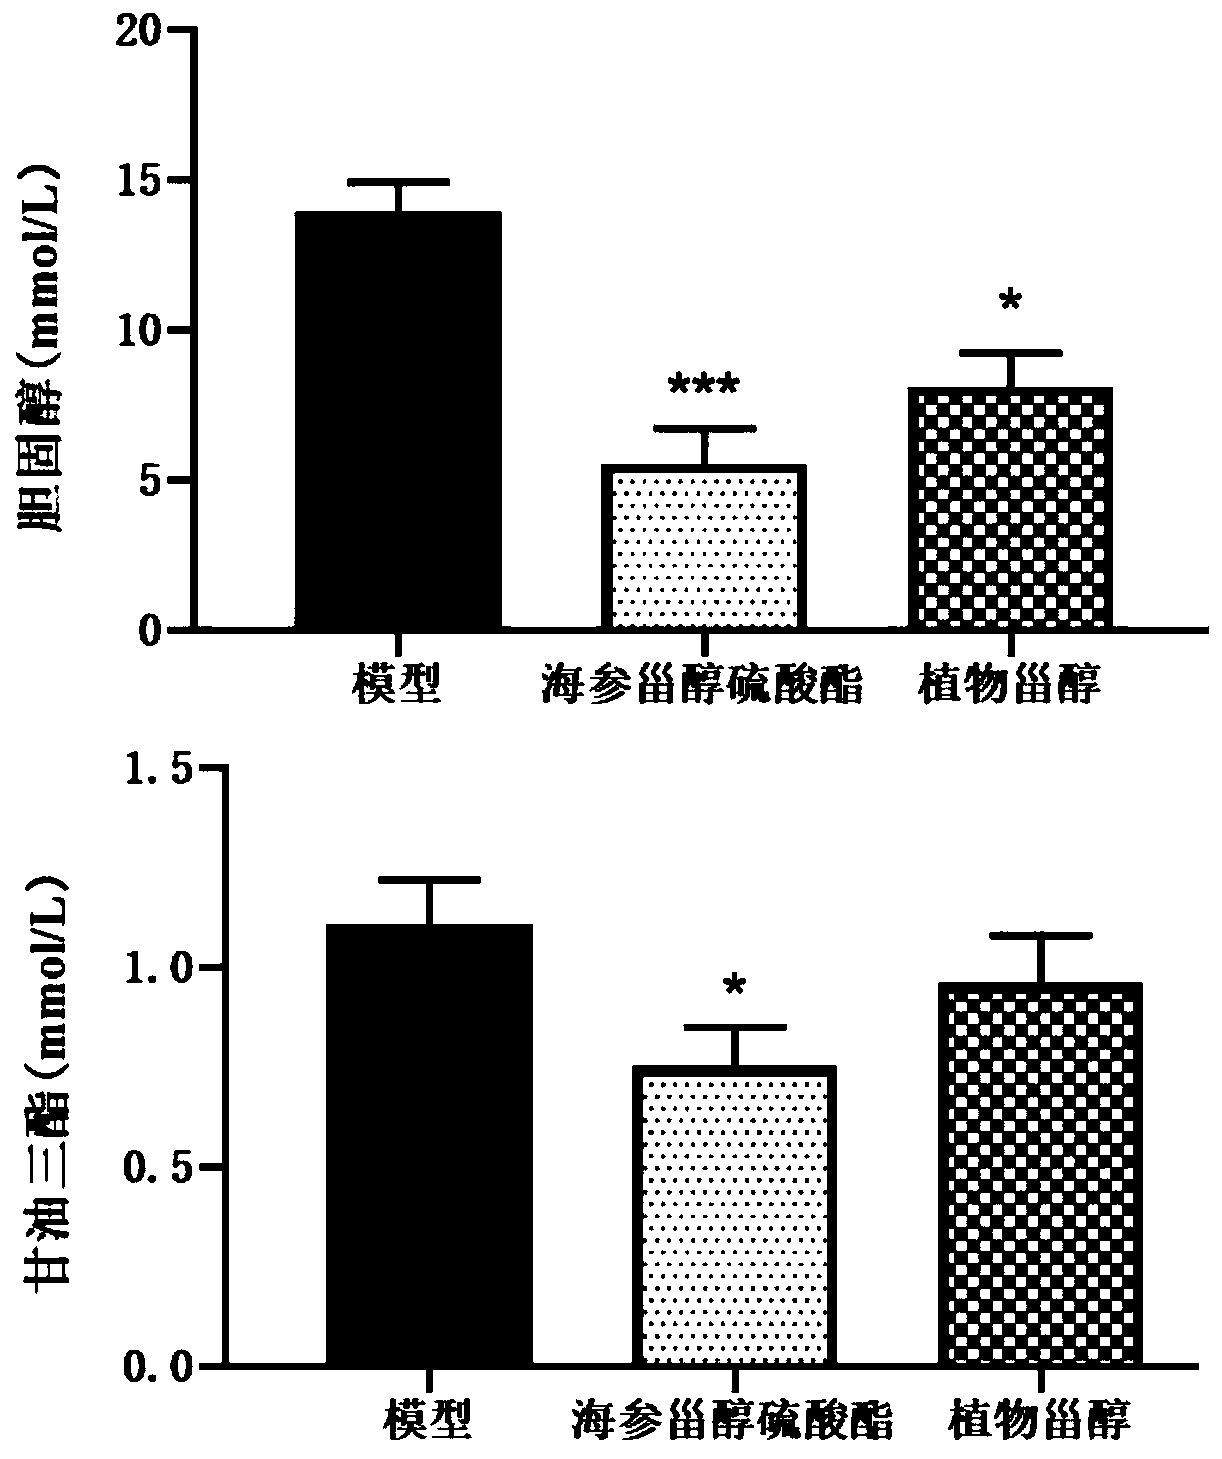 Application of sea cucumber sterol sulfate in anti-atherosclerosis product